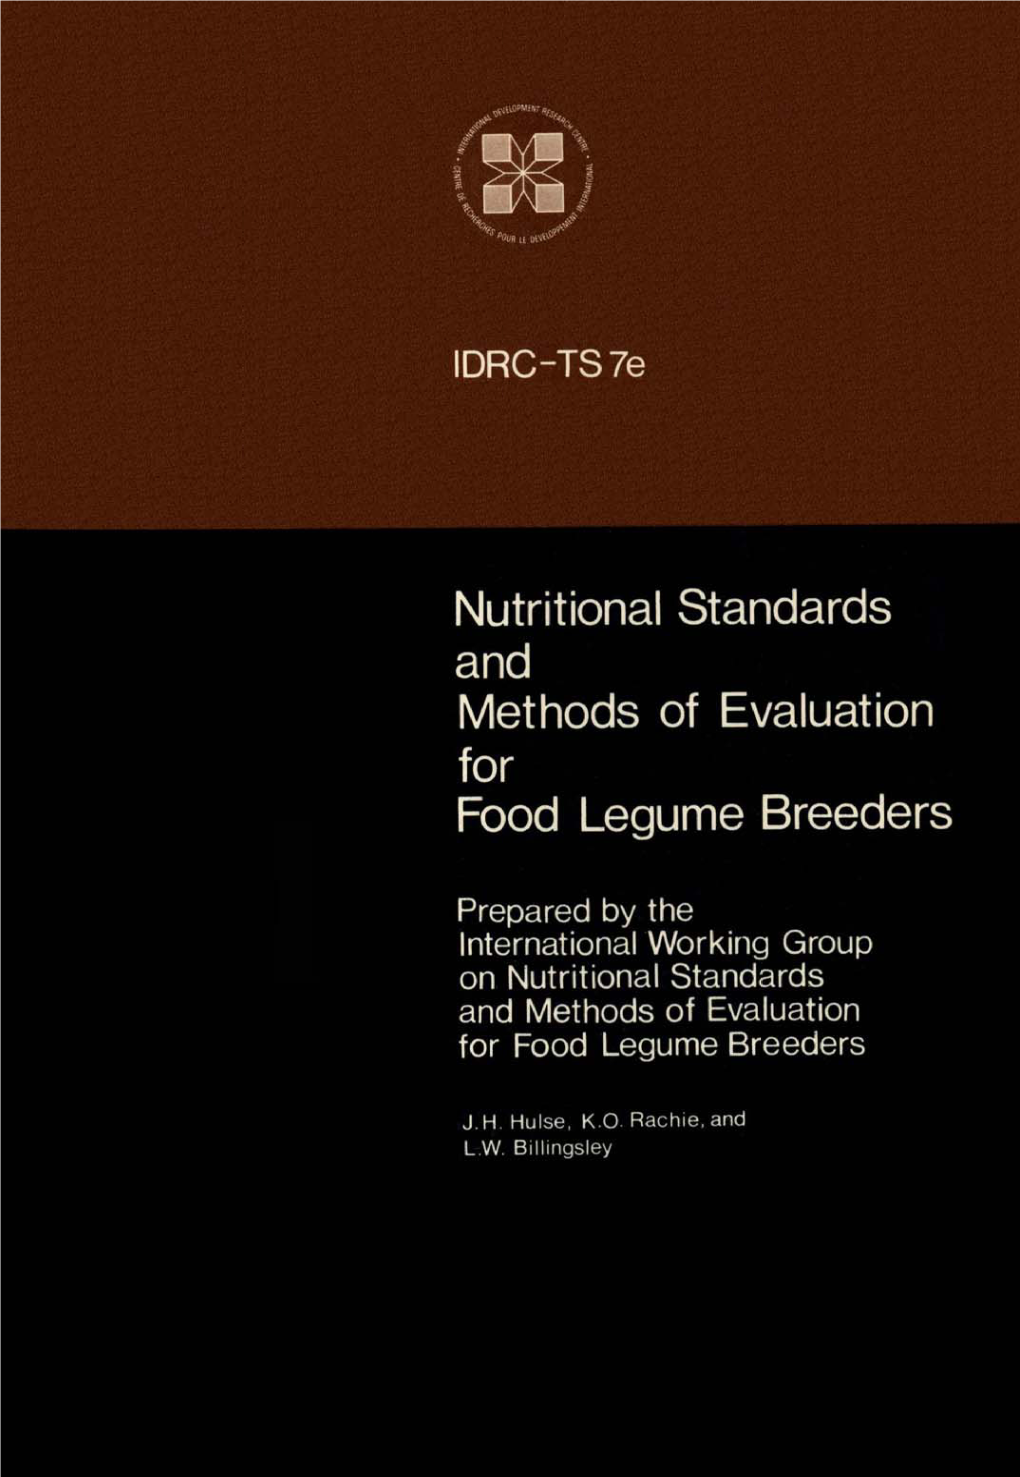 Nutritional Standards and Methods of Evaluation for Food Legume Breeders